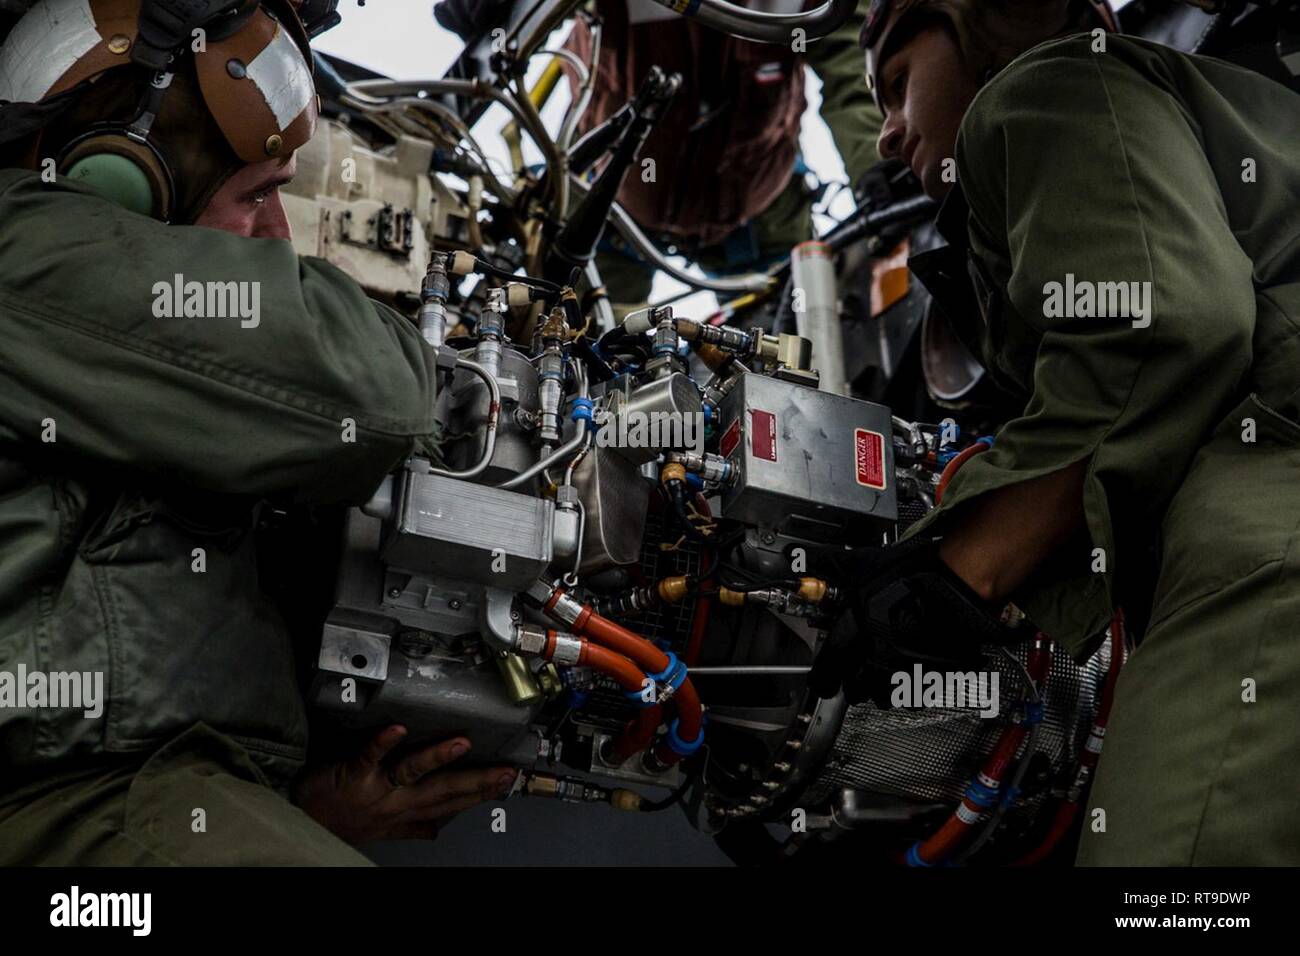 Marines with Marine Medium Tiltrotor Squadron 262 (Reinforced) install an auxiliary power unit onto an MV-22B Osprey tiltrotor aircraft atop the flight deck aboard the amphibious assault ship USS Wasp (LHD 1), Philippine Sea, Jan. 27, 2019. VMM-262 (Rein.) is the Aviation Combat Element for the 31st Marine Expeditionary Unit. VMM-262 (Rein.) maintainers ensure the squadron’s aircraft are safe for flight during flight operations. The 31st MEU, the Marine Corps’ only continuously forward-deployed MEU partnering with the Wasp Amphibious Ready Group, provides a flexible and lethal force ready to p Stock Photo